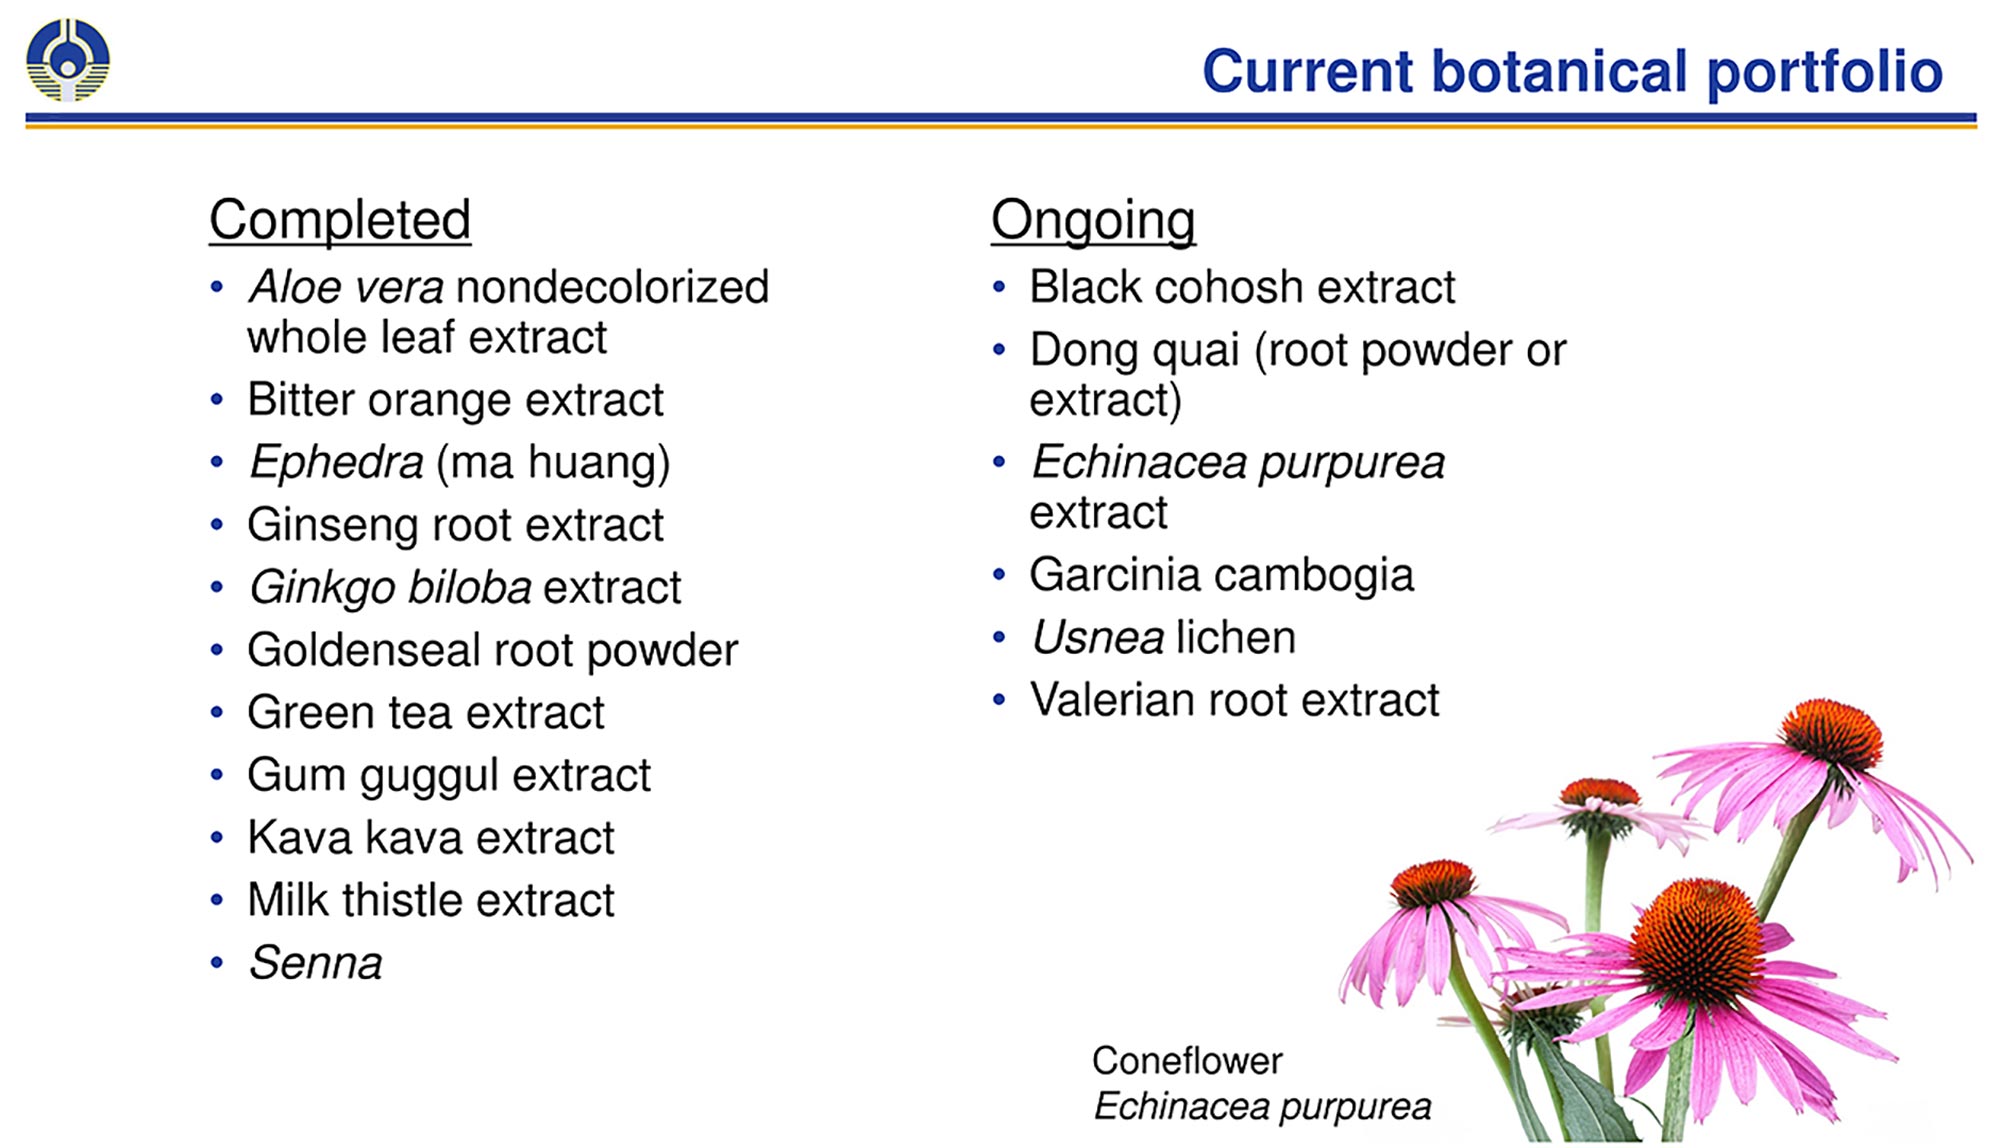 list of completed and ongoing NTP current botanical portfolio and purple coneflower in corner